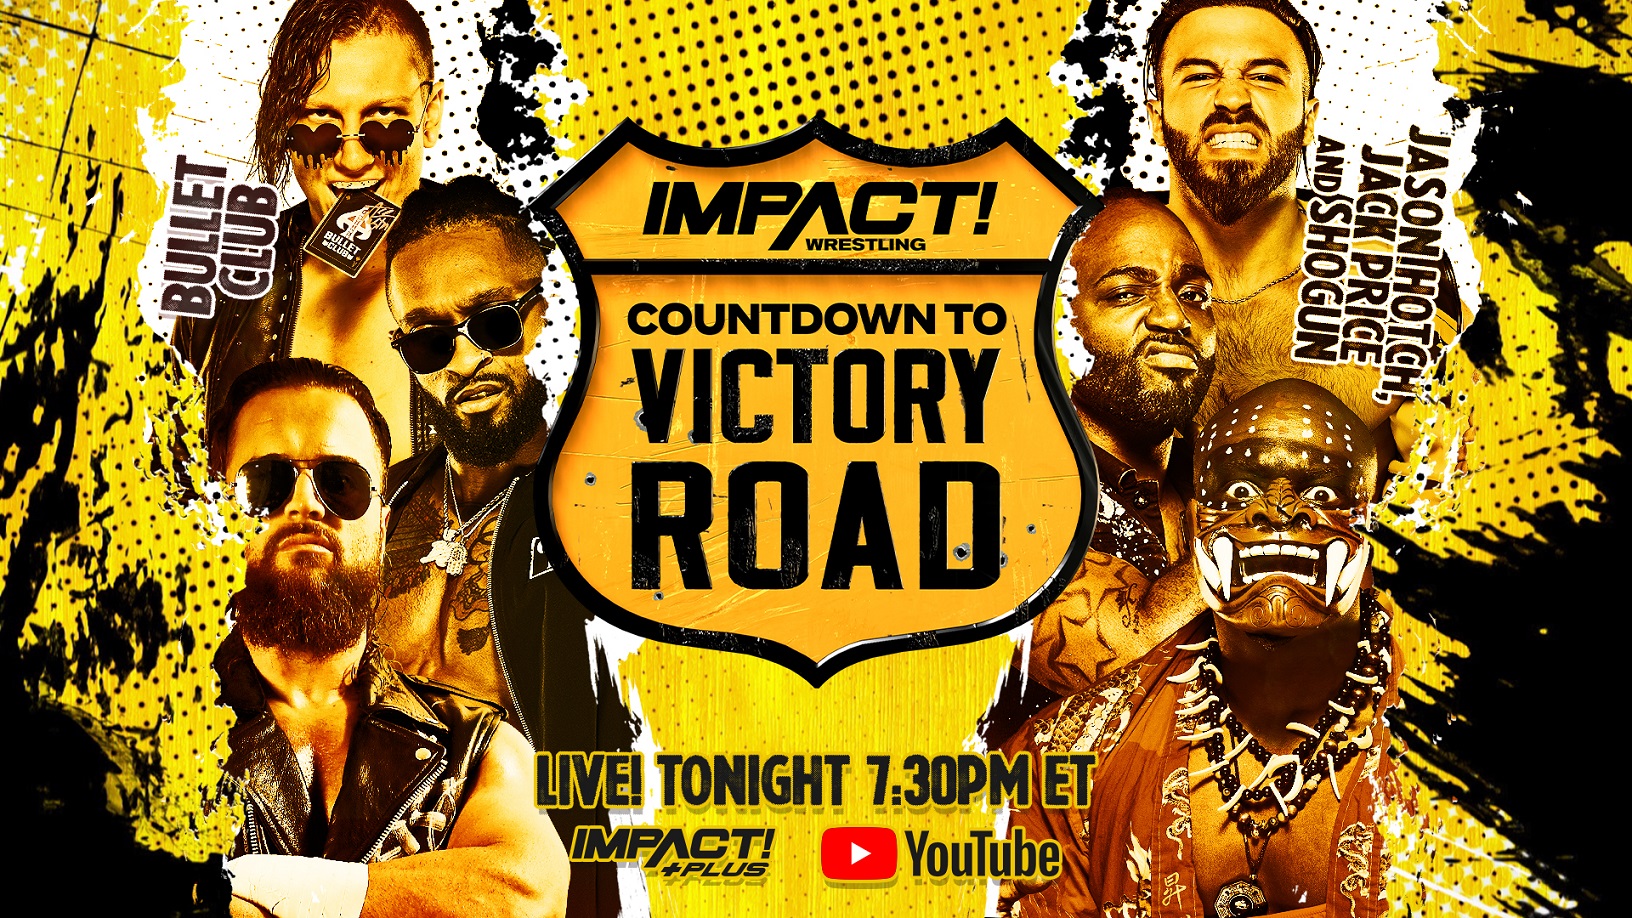 Juice Robinson Returns to IMPACT Tonight, Joins Forces With Ace Austin & Chris Bey on Countdown to Victory Road